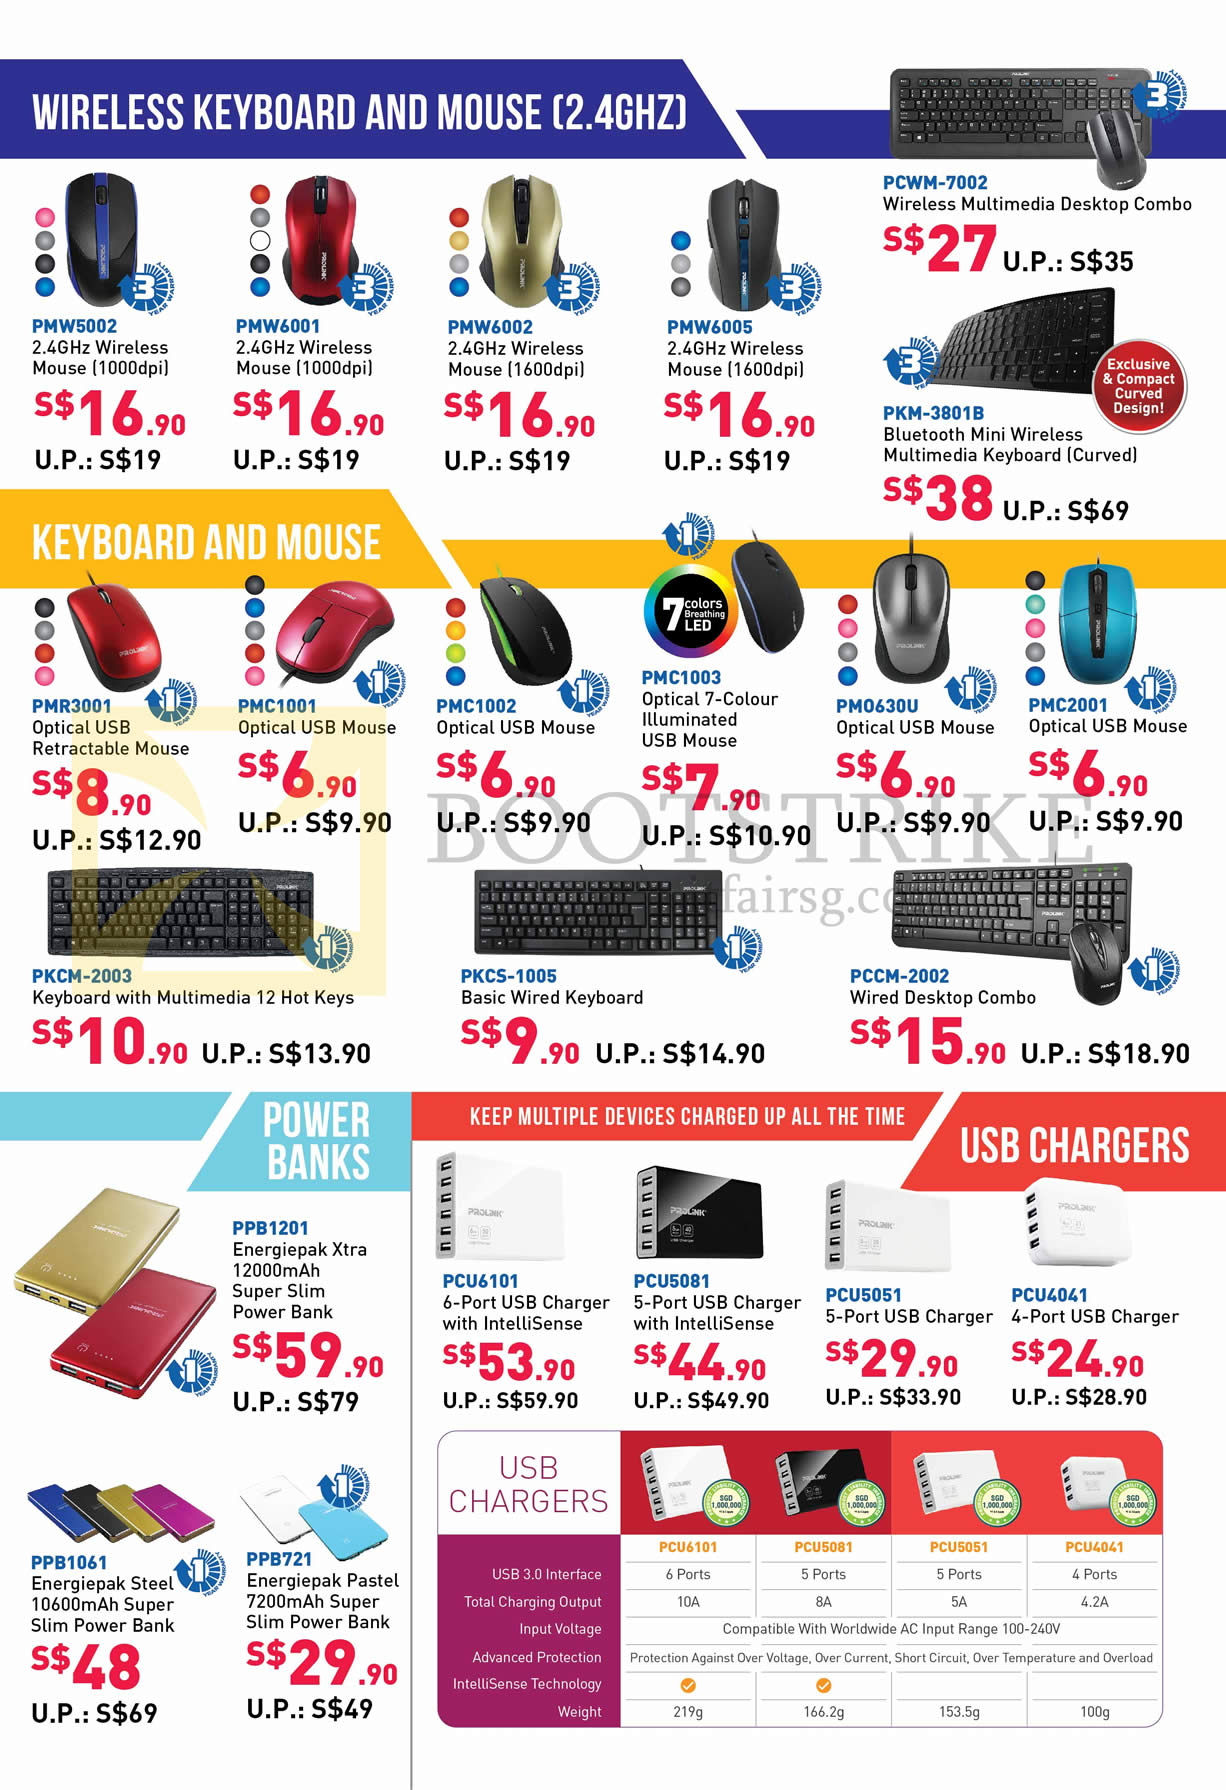 PC SHOW 2016 price list image brochure of Prolink Wireless Keyboard, Mouse, Power Banks, USB Chargers, PMW5002, 6001, 6002, 6005, PMR3001, PMC1001, 1002, 1003, PKCM-2003, PPB1201, 1041, 721